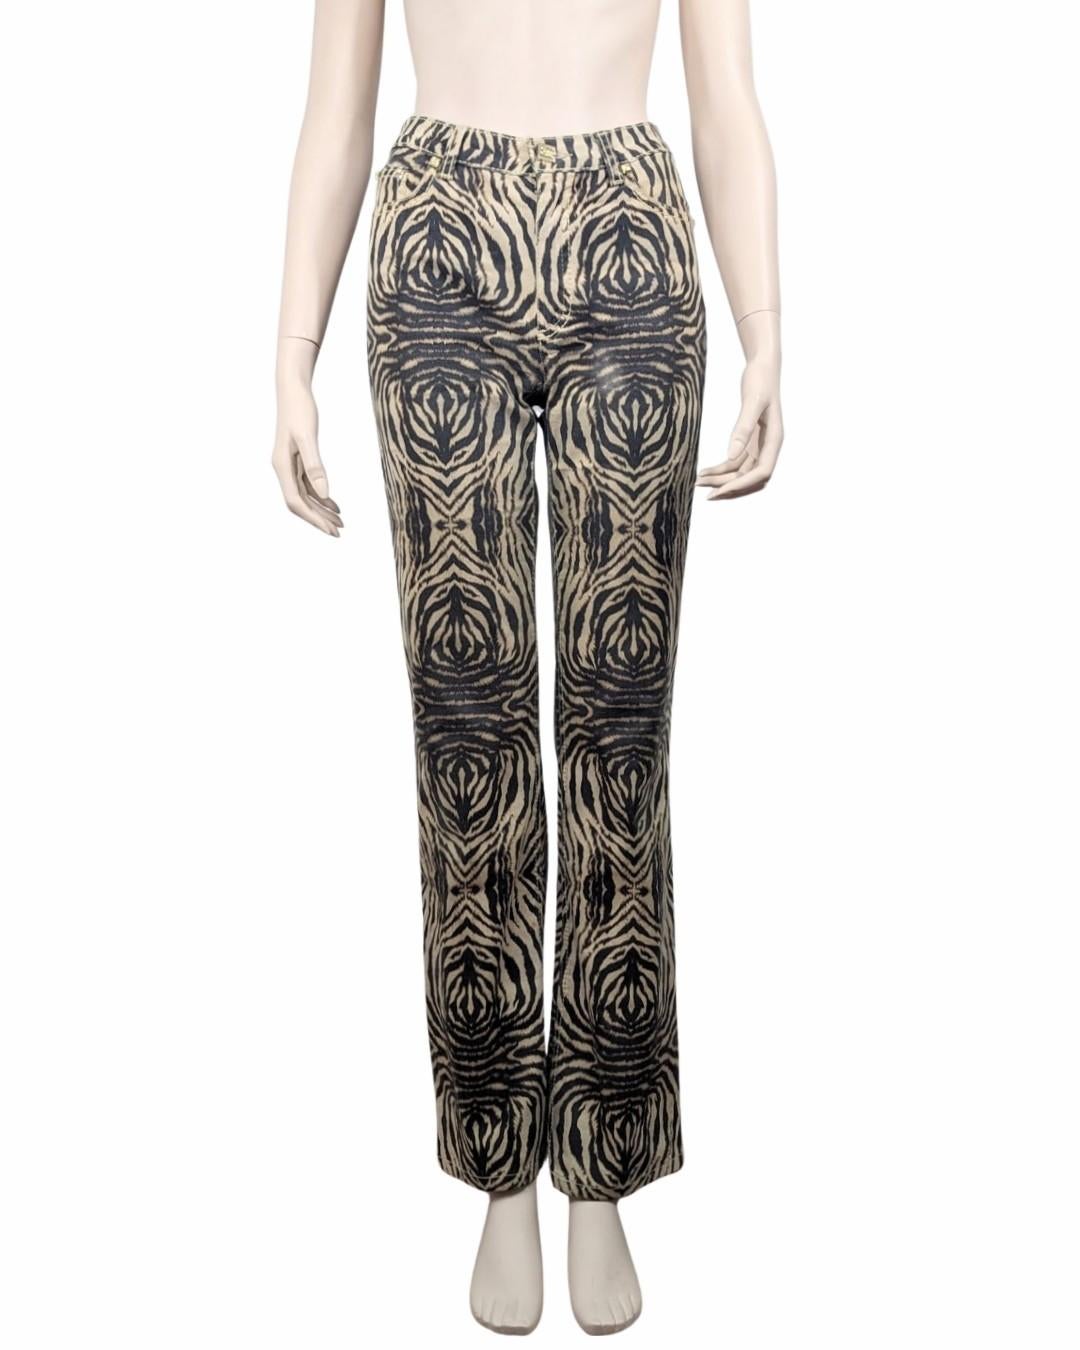 Roberto Cavalli animal print jeans. Circa 2000s.

. High waist
· Slightly flared jeans
· Gold jewelry buttons

Size Fits XS to S 36FR

Flat measurements : 

Waist : 35 cm
Hips : 47 cm
Inseam : 80 cm
Front rise : 24 cm
Length : 105 cm

Colors : Brown